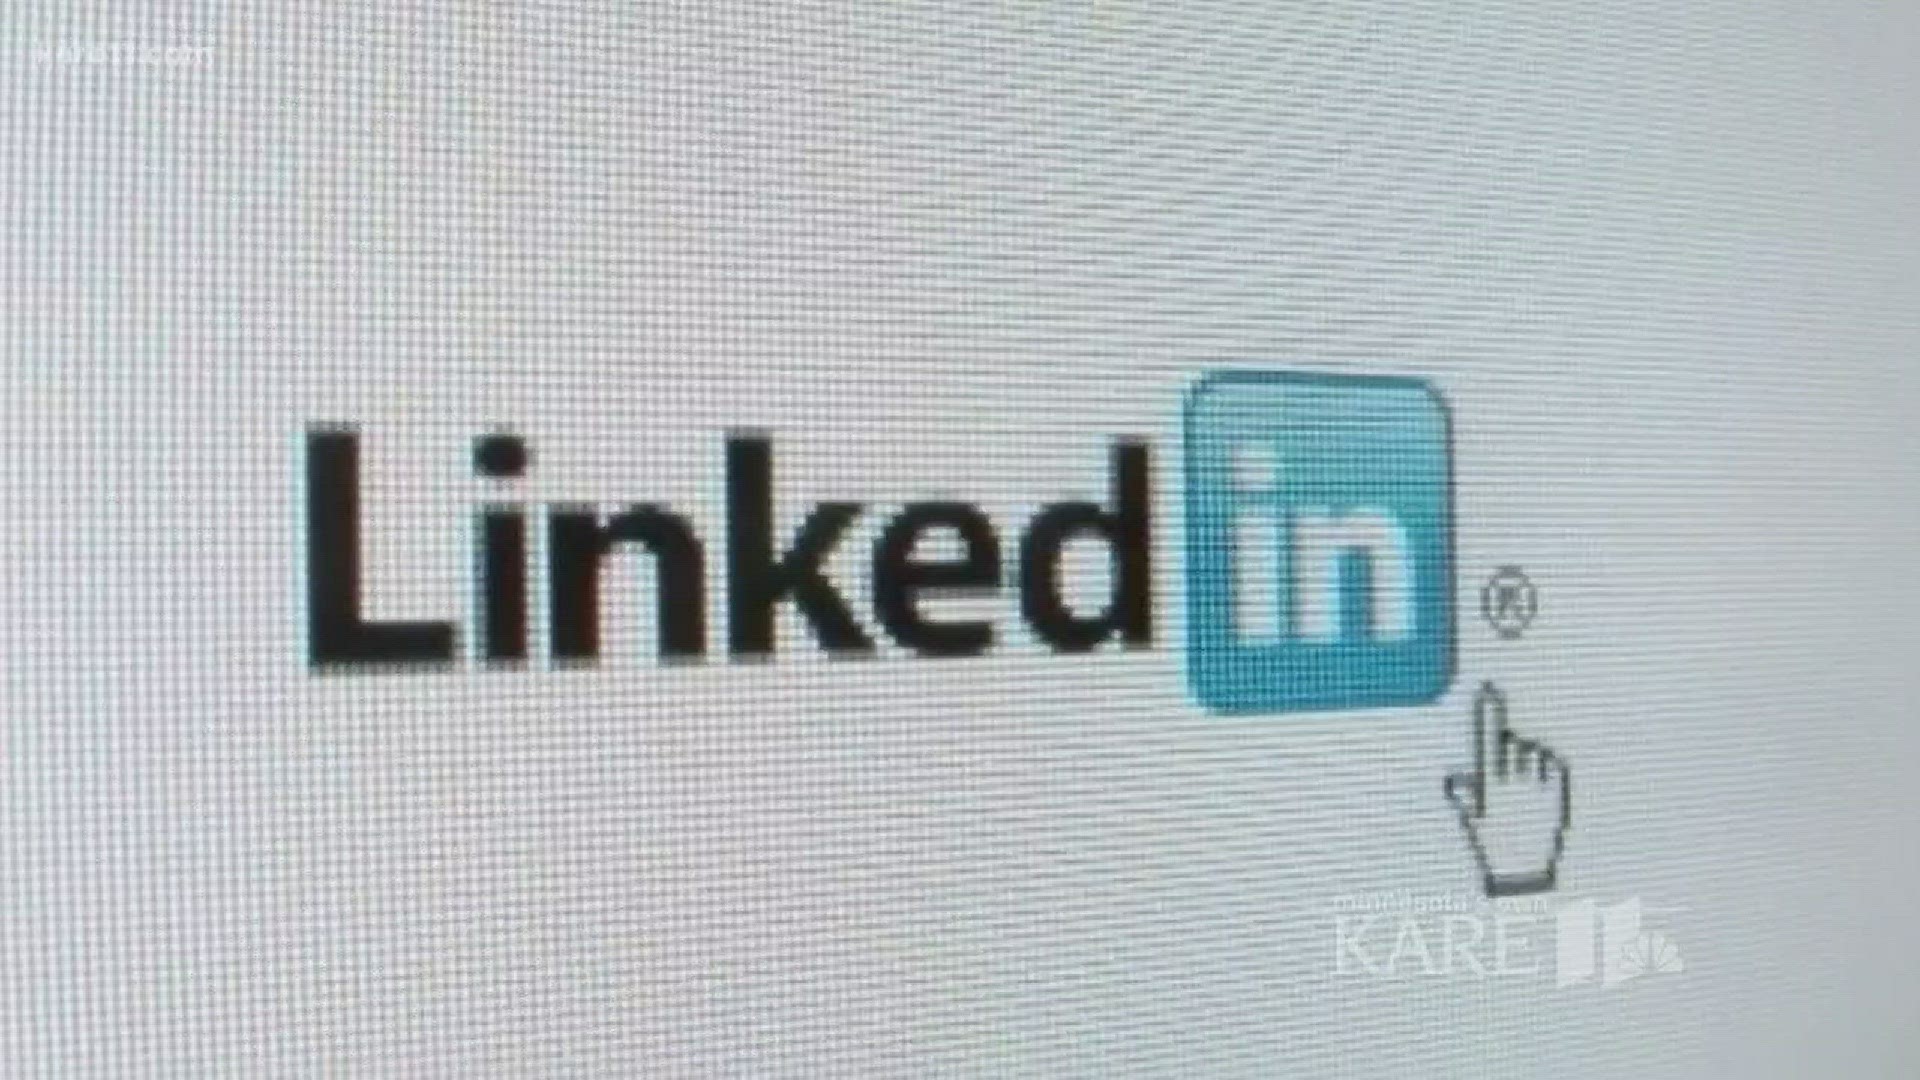 Carol Kaemmerer, author of "LinkedIn For The Savvy Executive", appeared on KARE 11 News at 11 to give job seekers an edge.